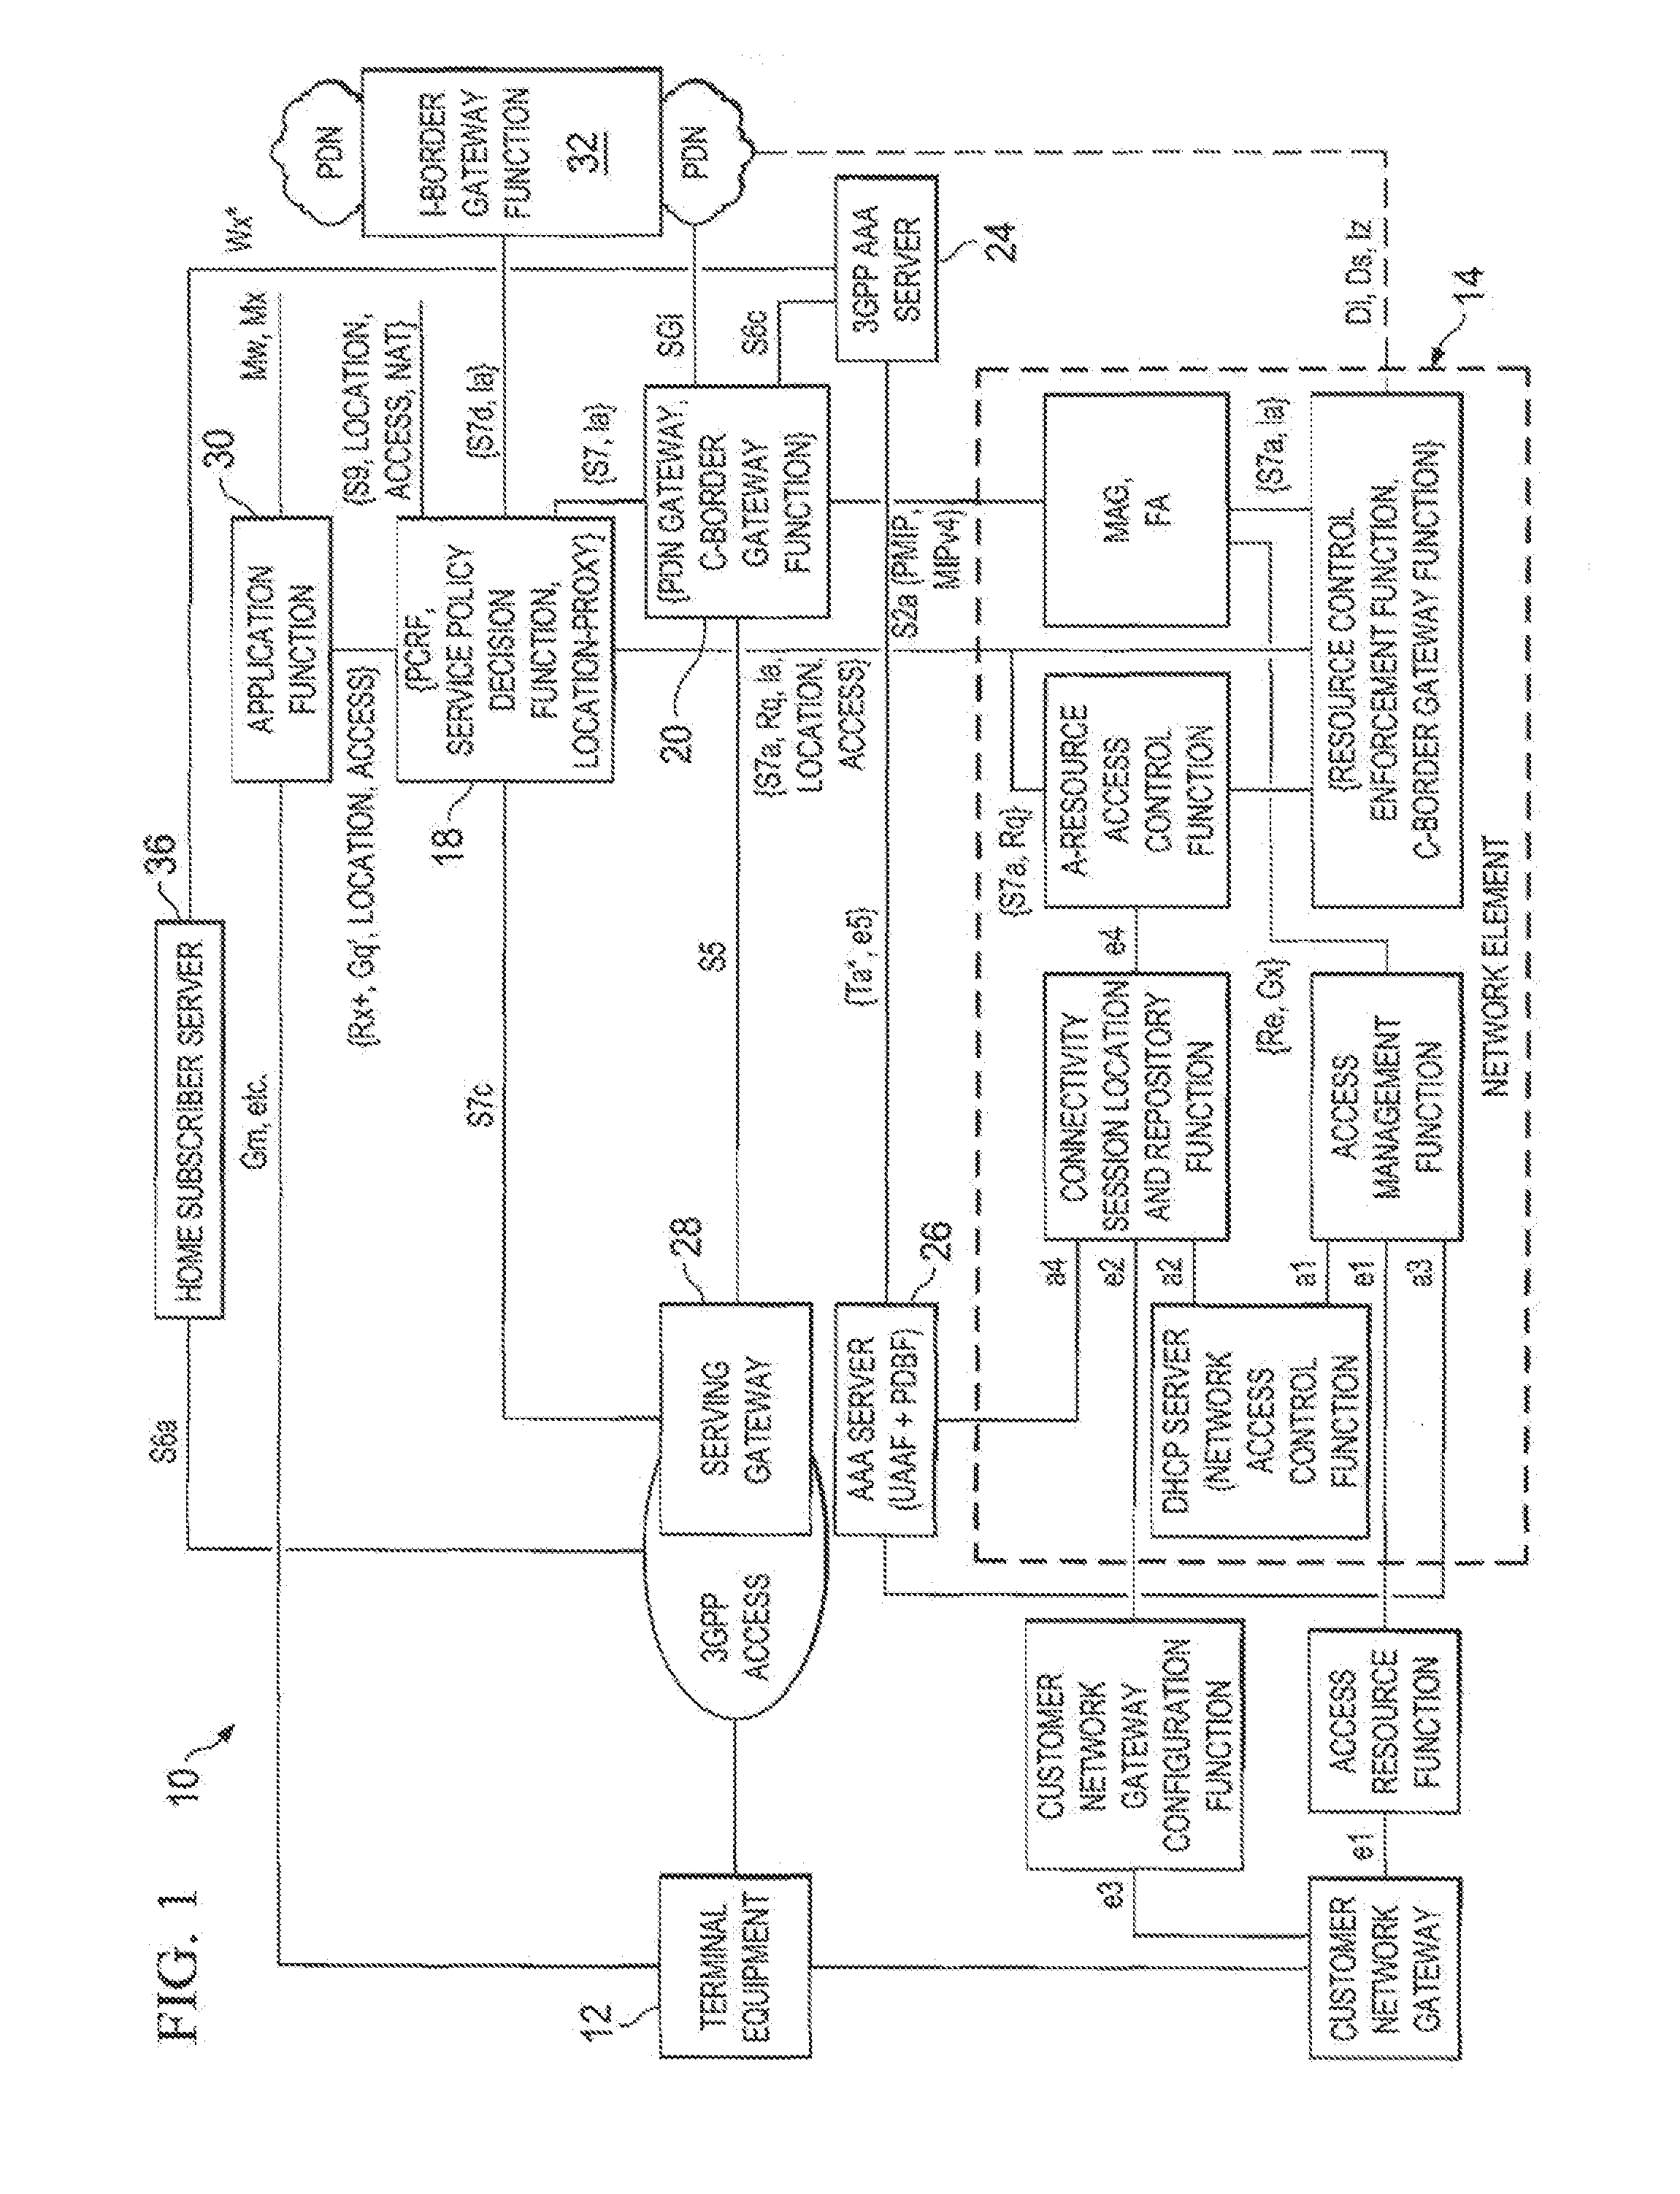 System and method for providing location and access network information support in a network environment